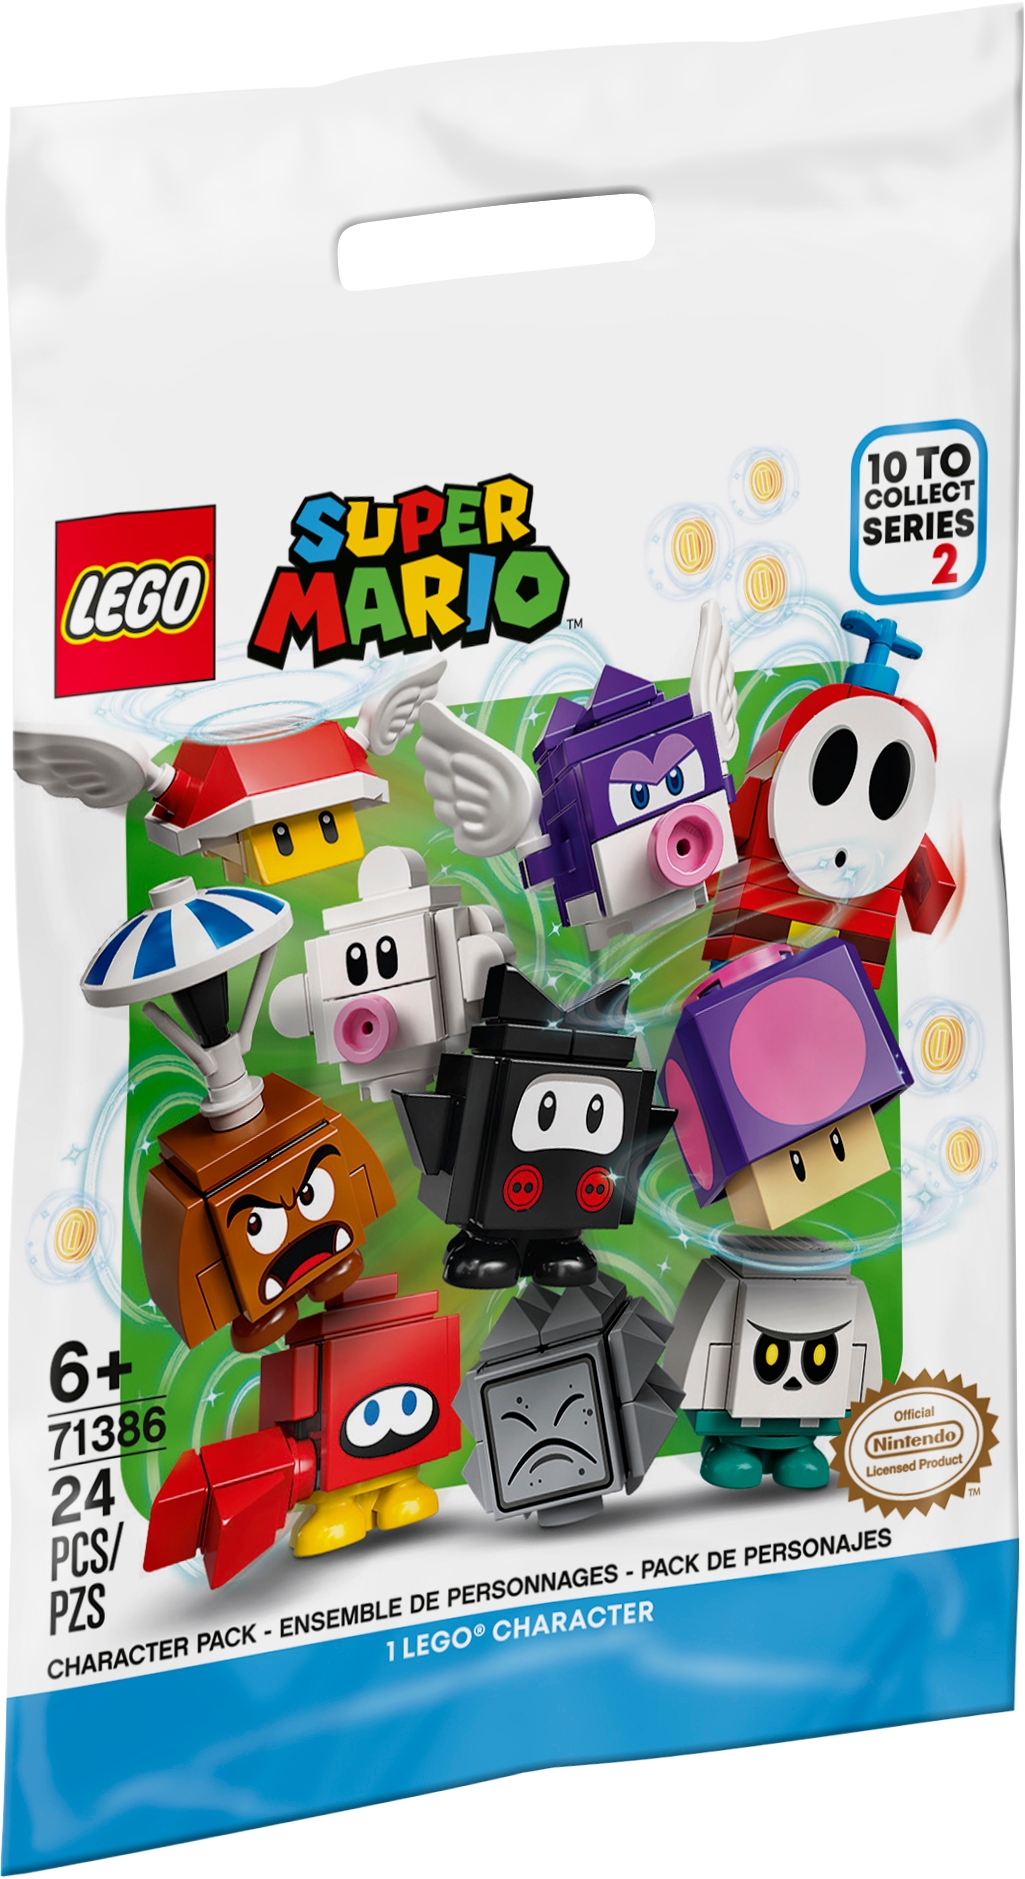 New Sealed Peepa Ghost From Super Mario LEGO Character Pack minifigure 71361 Boo 